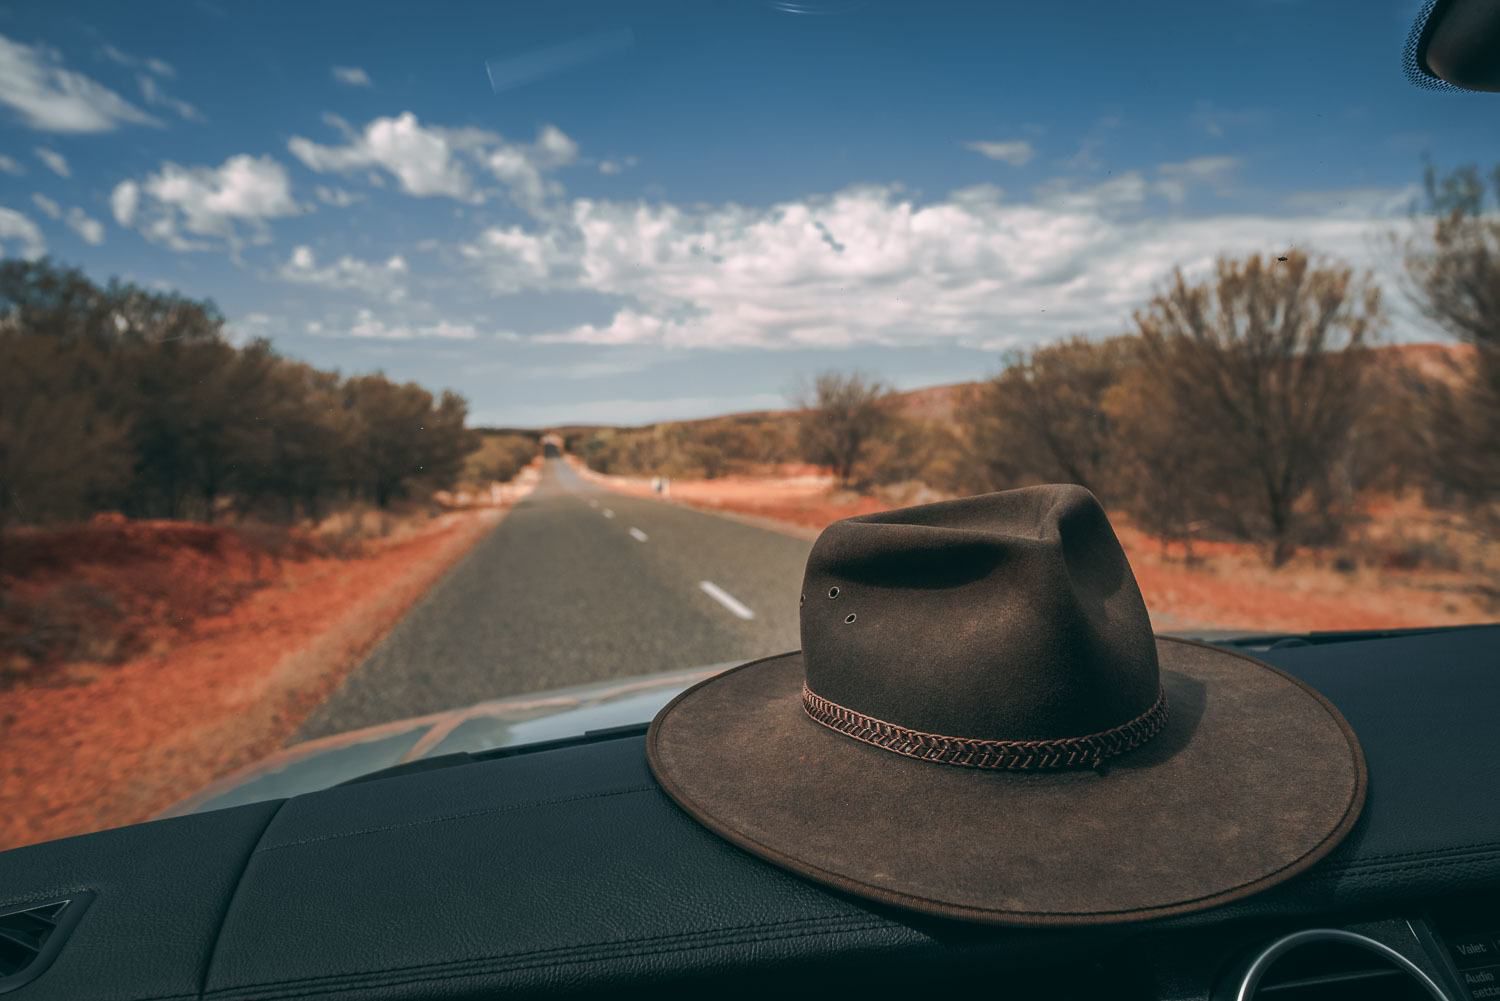 78 Road Trip Quotes Captions To Inspire Your Next Adventure